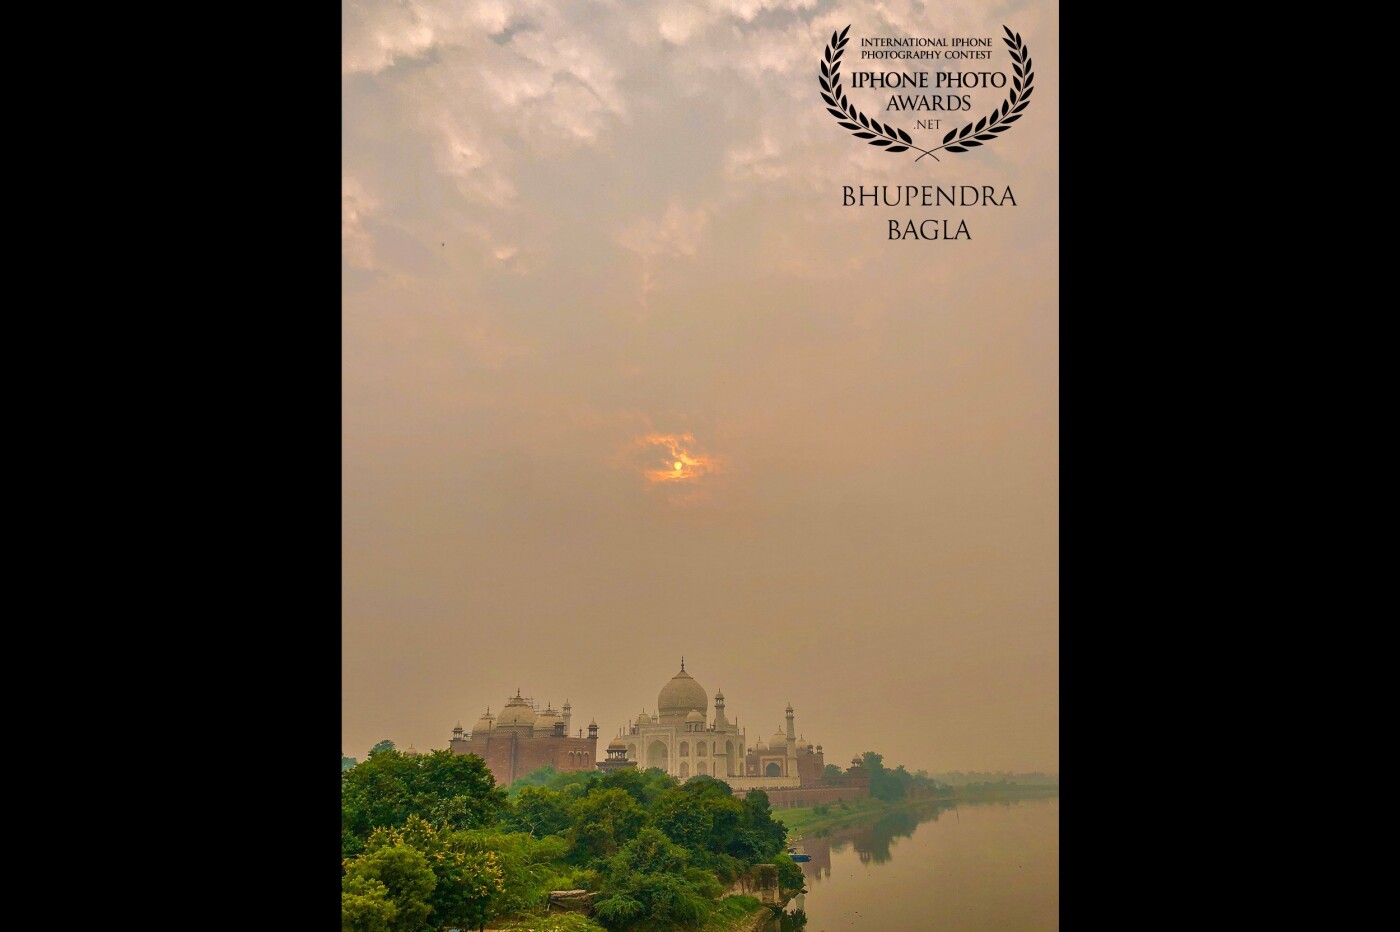 This was taken from the canopy spot which is around 5 km walk from the Taj Mahal east gate entrance. It was shot in the evening during the sunset time and the sun hiding right on top of the Taj Mahal between the clouds looked quite dramatic. The whole scene looked quite dreamy and romantic and it was worth capturing. 